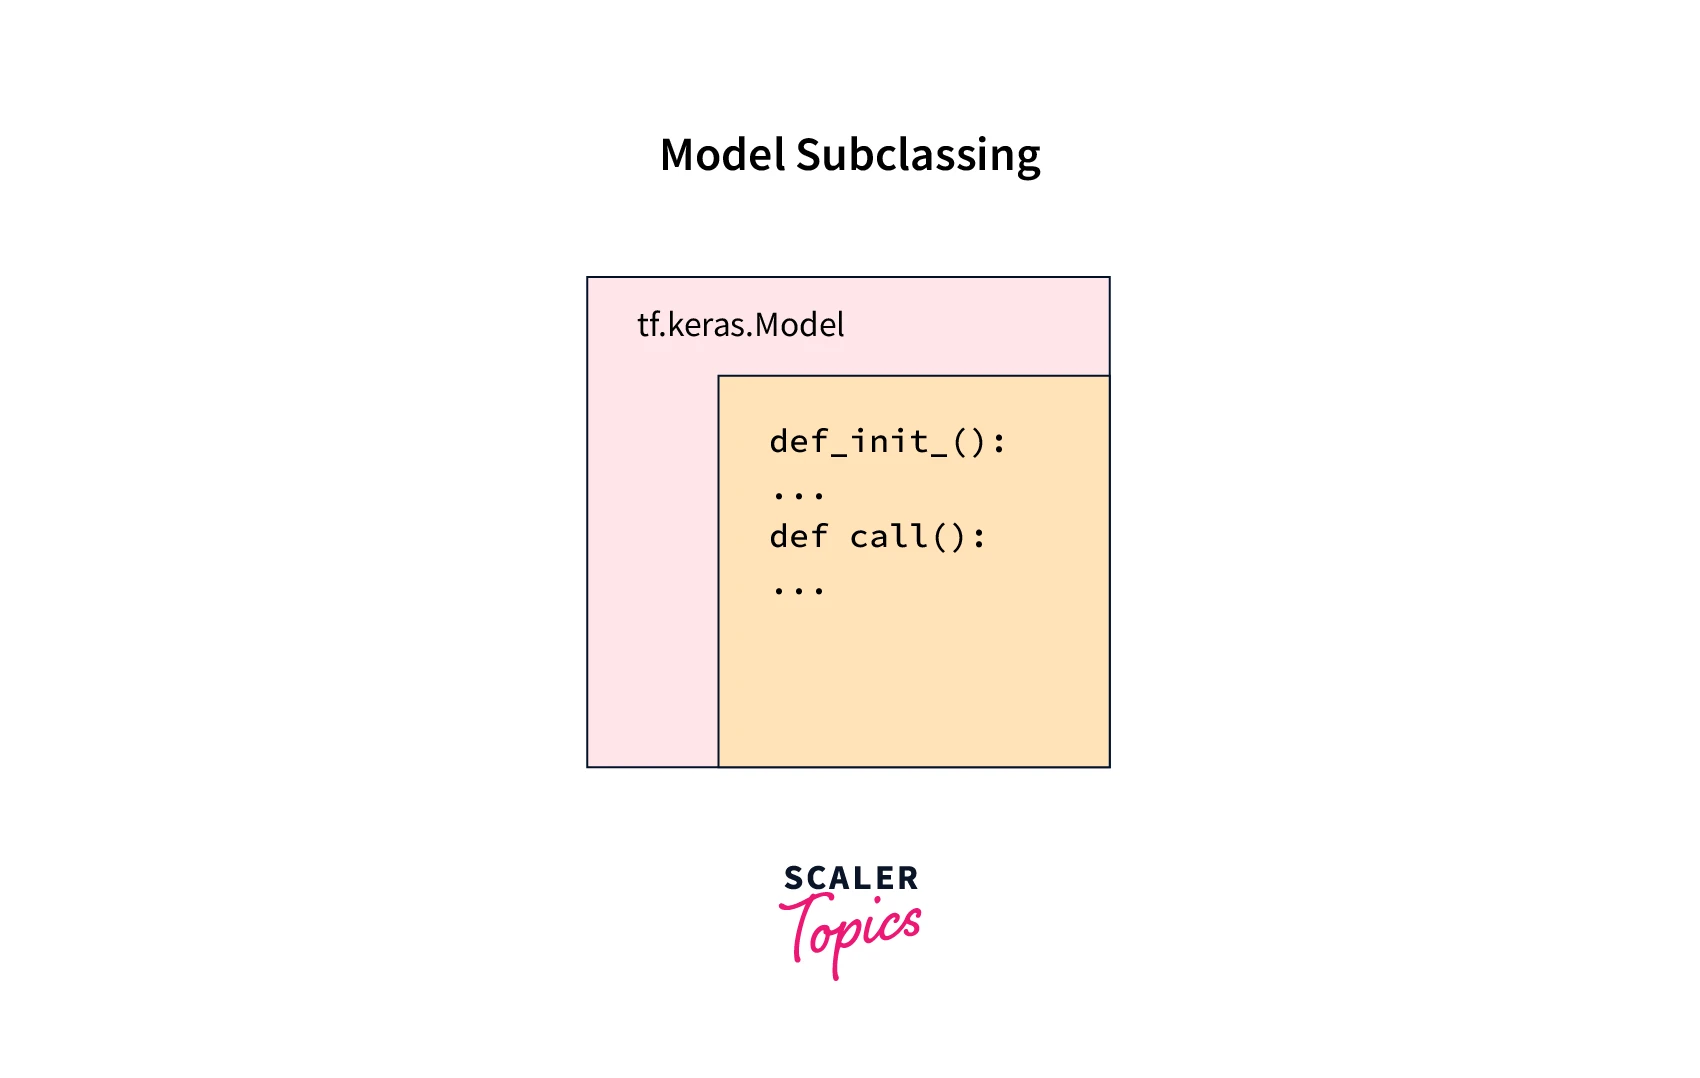 structure-of-model-subclassing